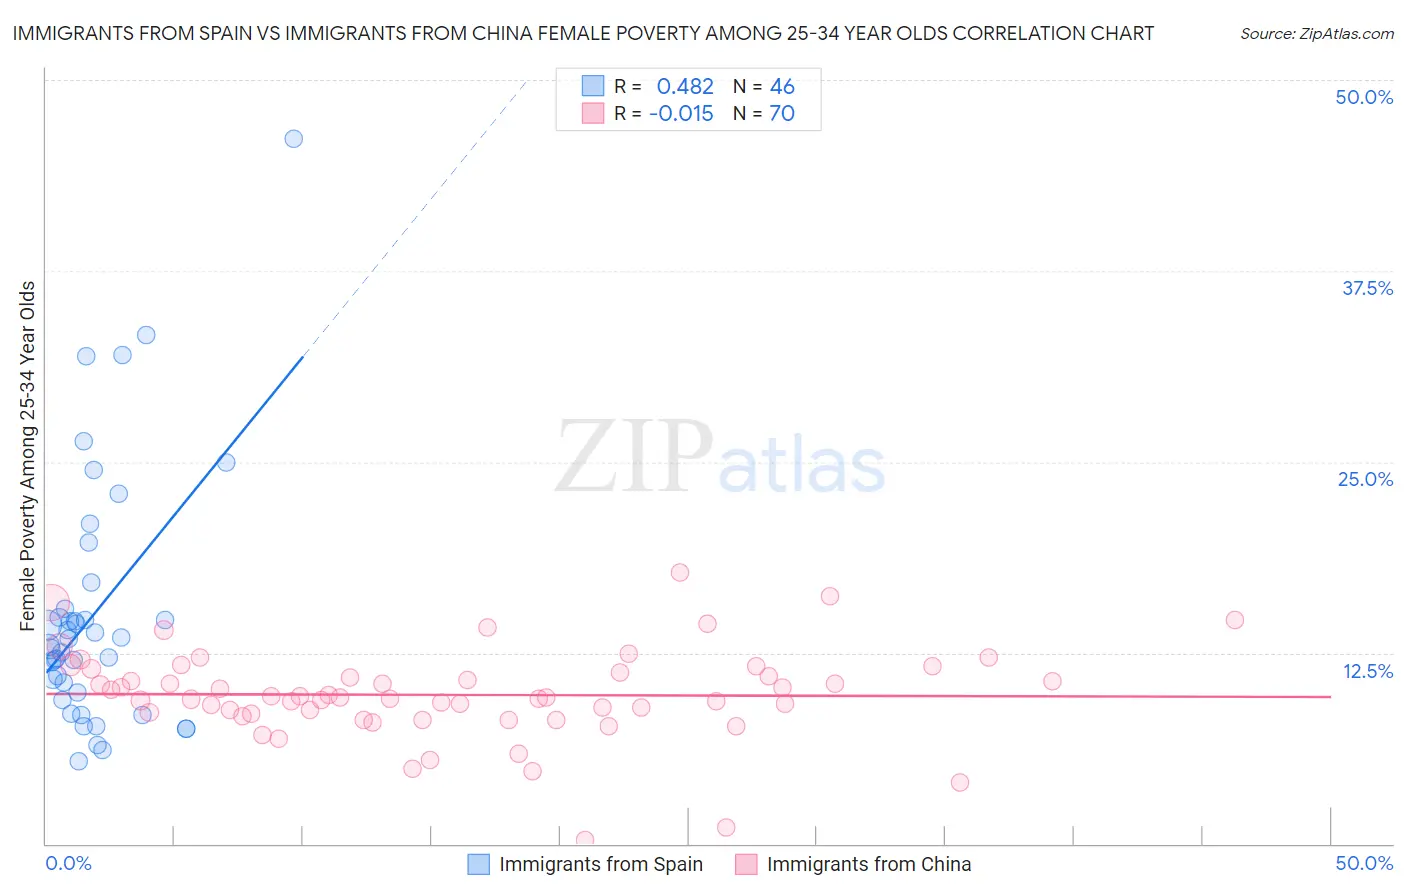 Immigrants from Spain vs Immigrants from China Female Poverty Among 25-34 Year Olds